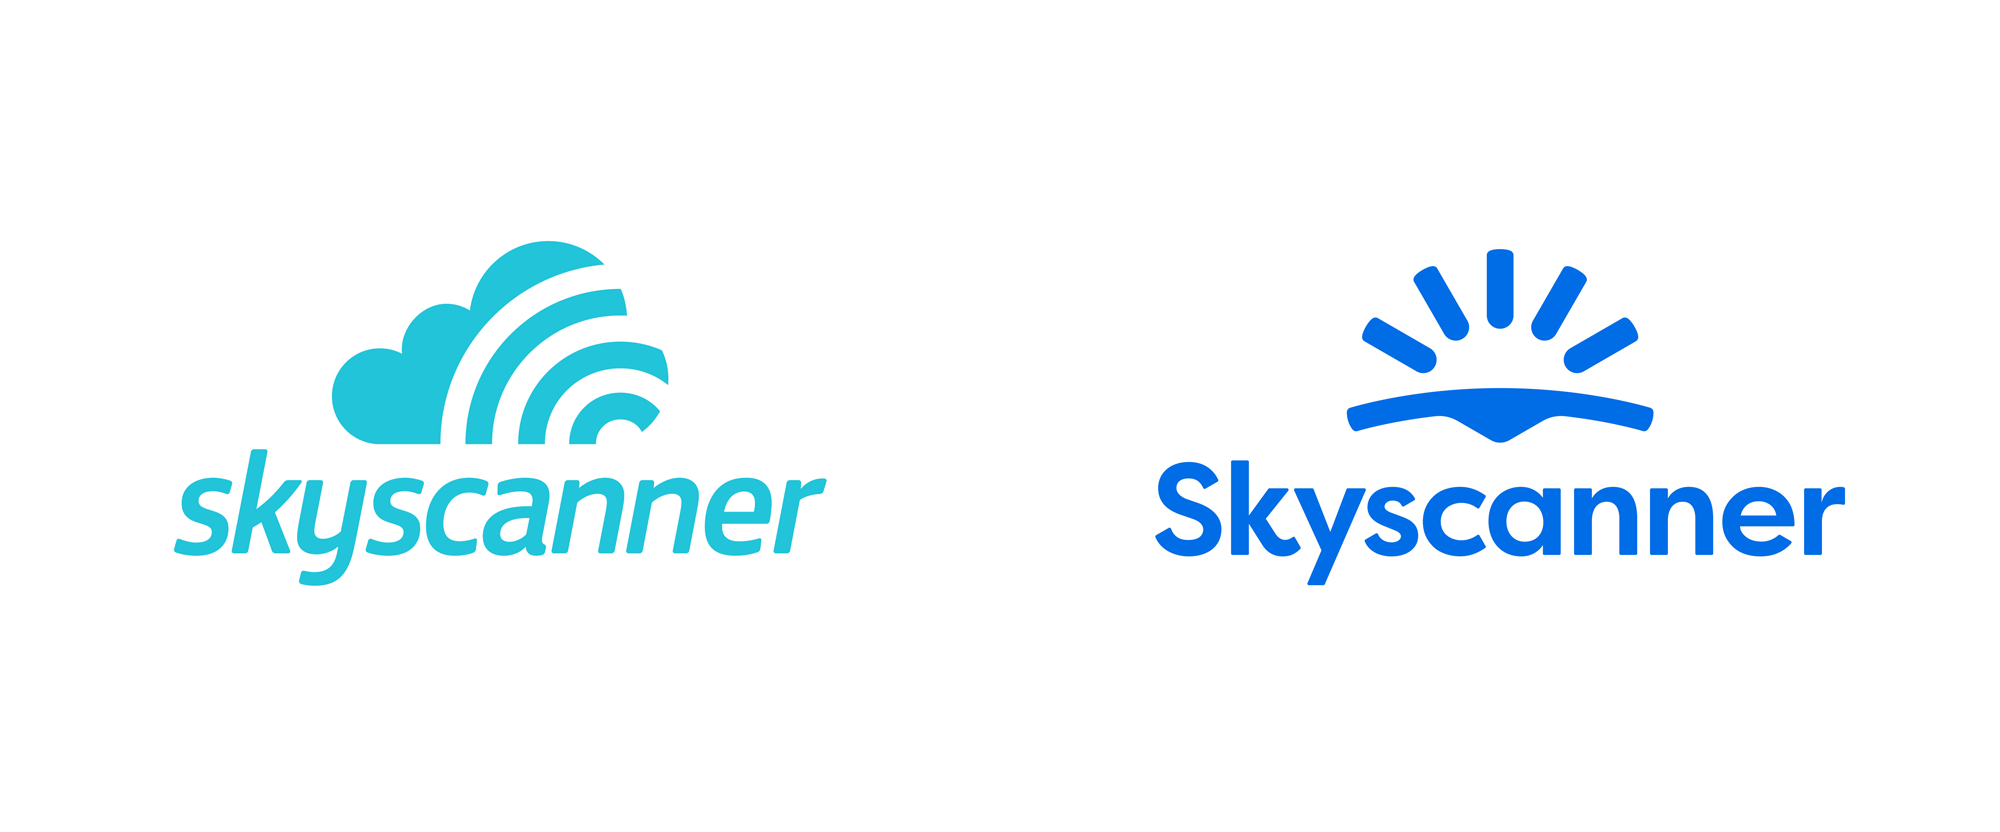 New Logo and Identity for Skyscanner by Koto